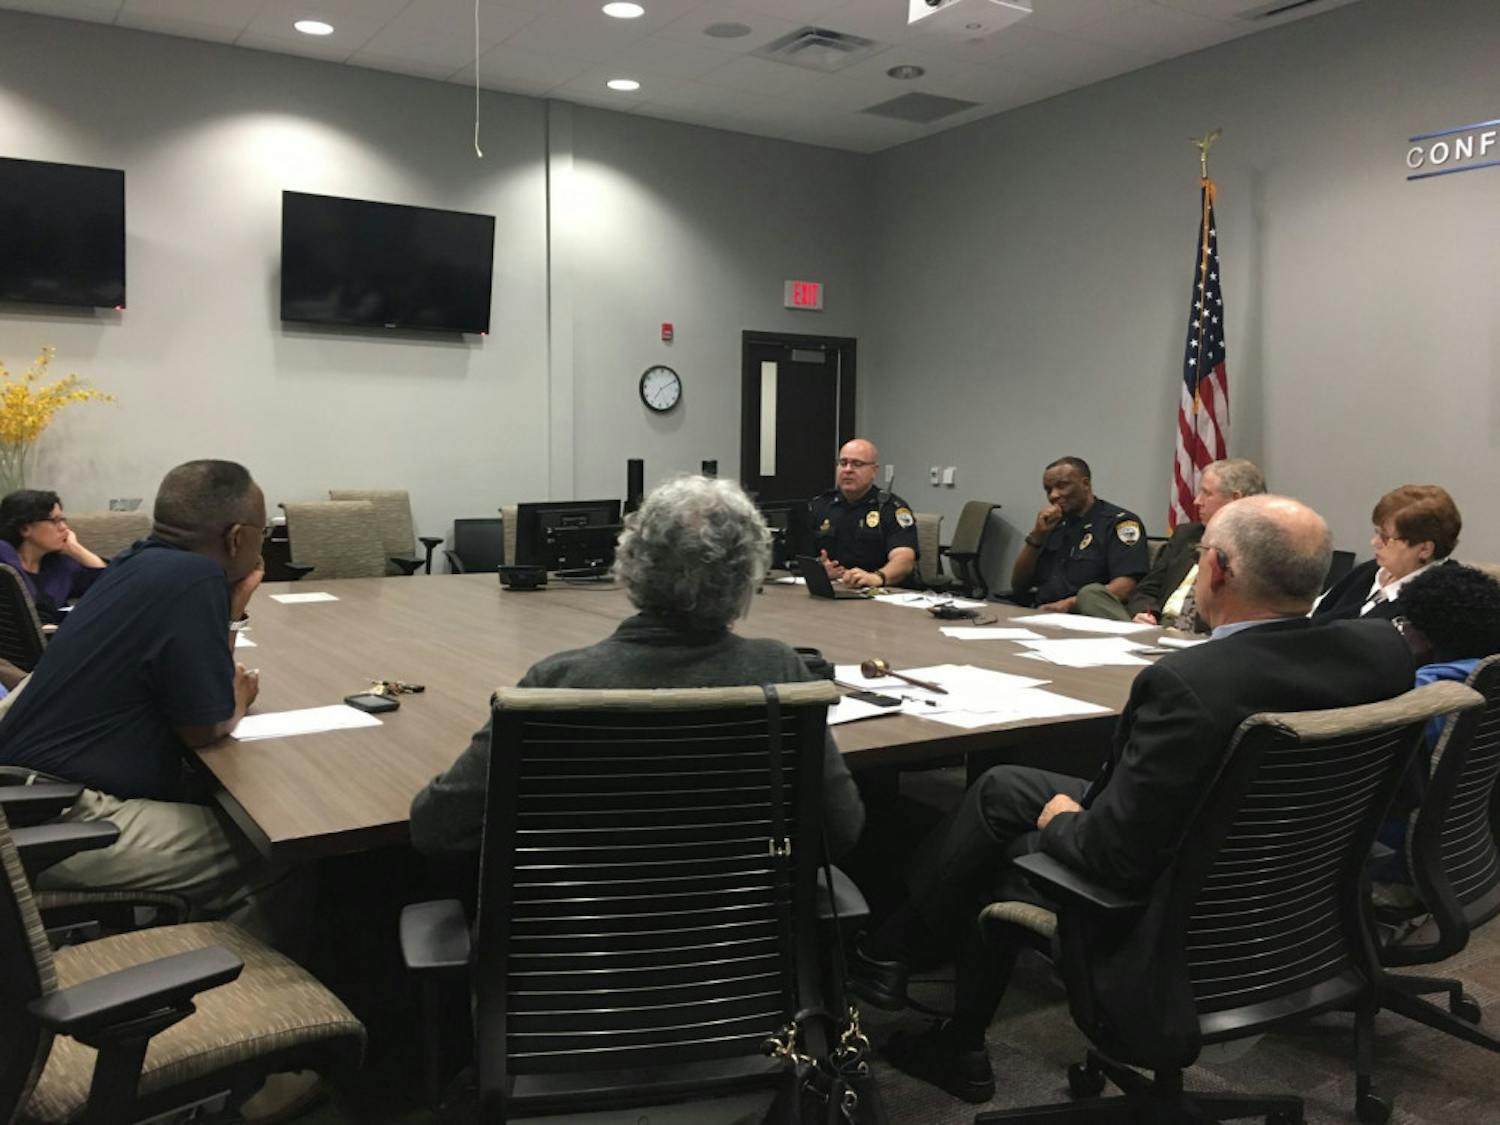 Members of the Police Advisory Council talk about increased gang violence in Gainesville.
&nbsp;